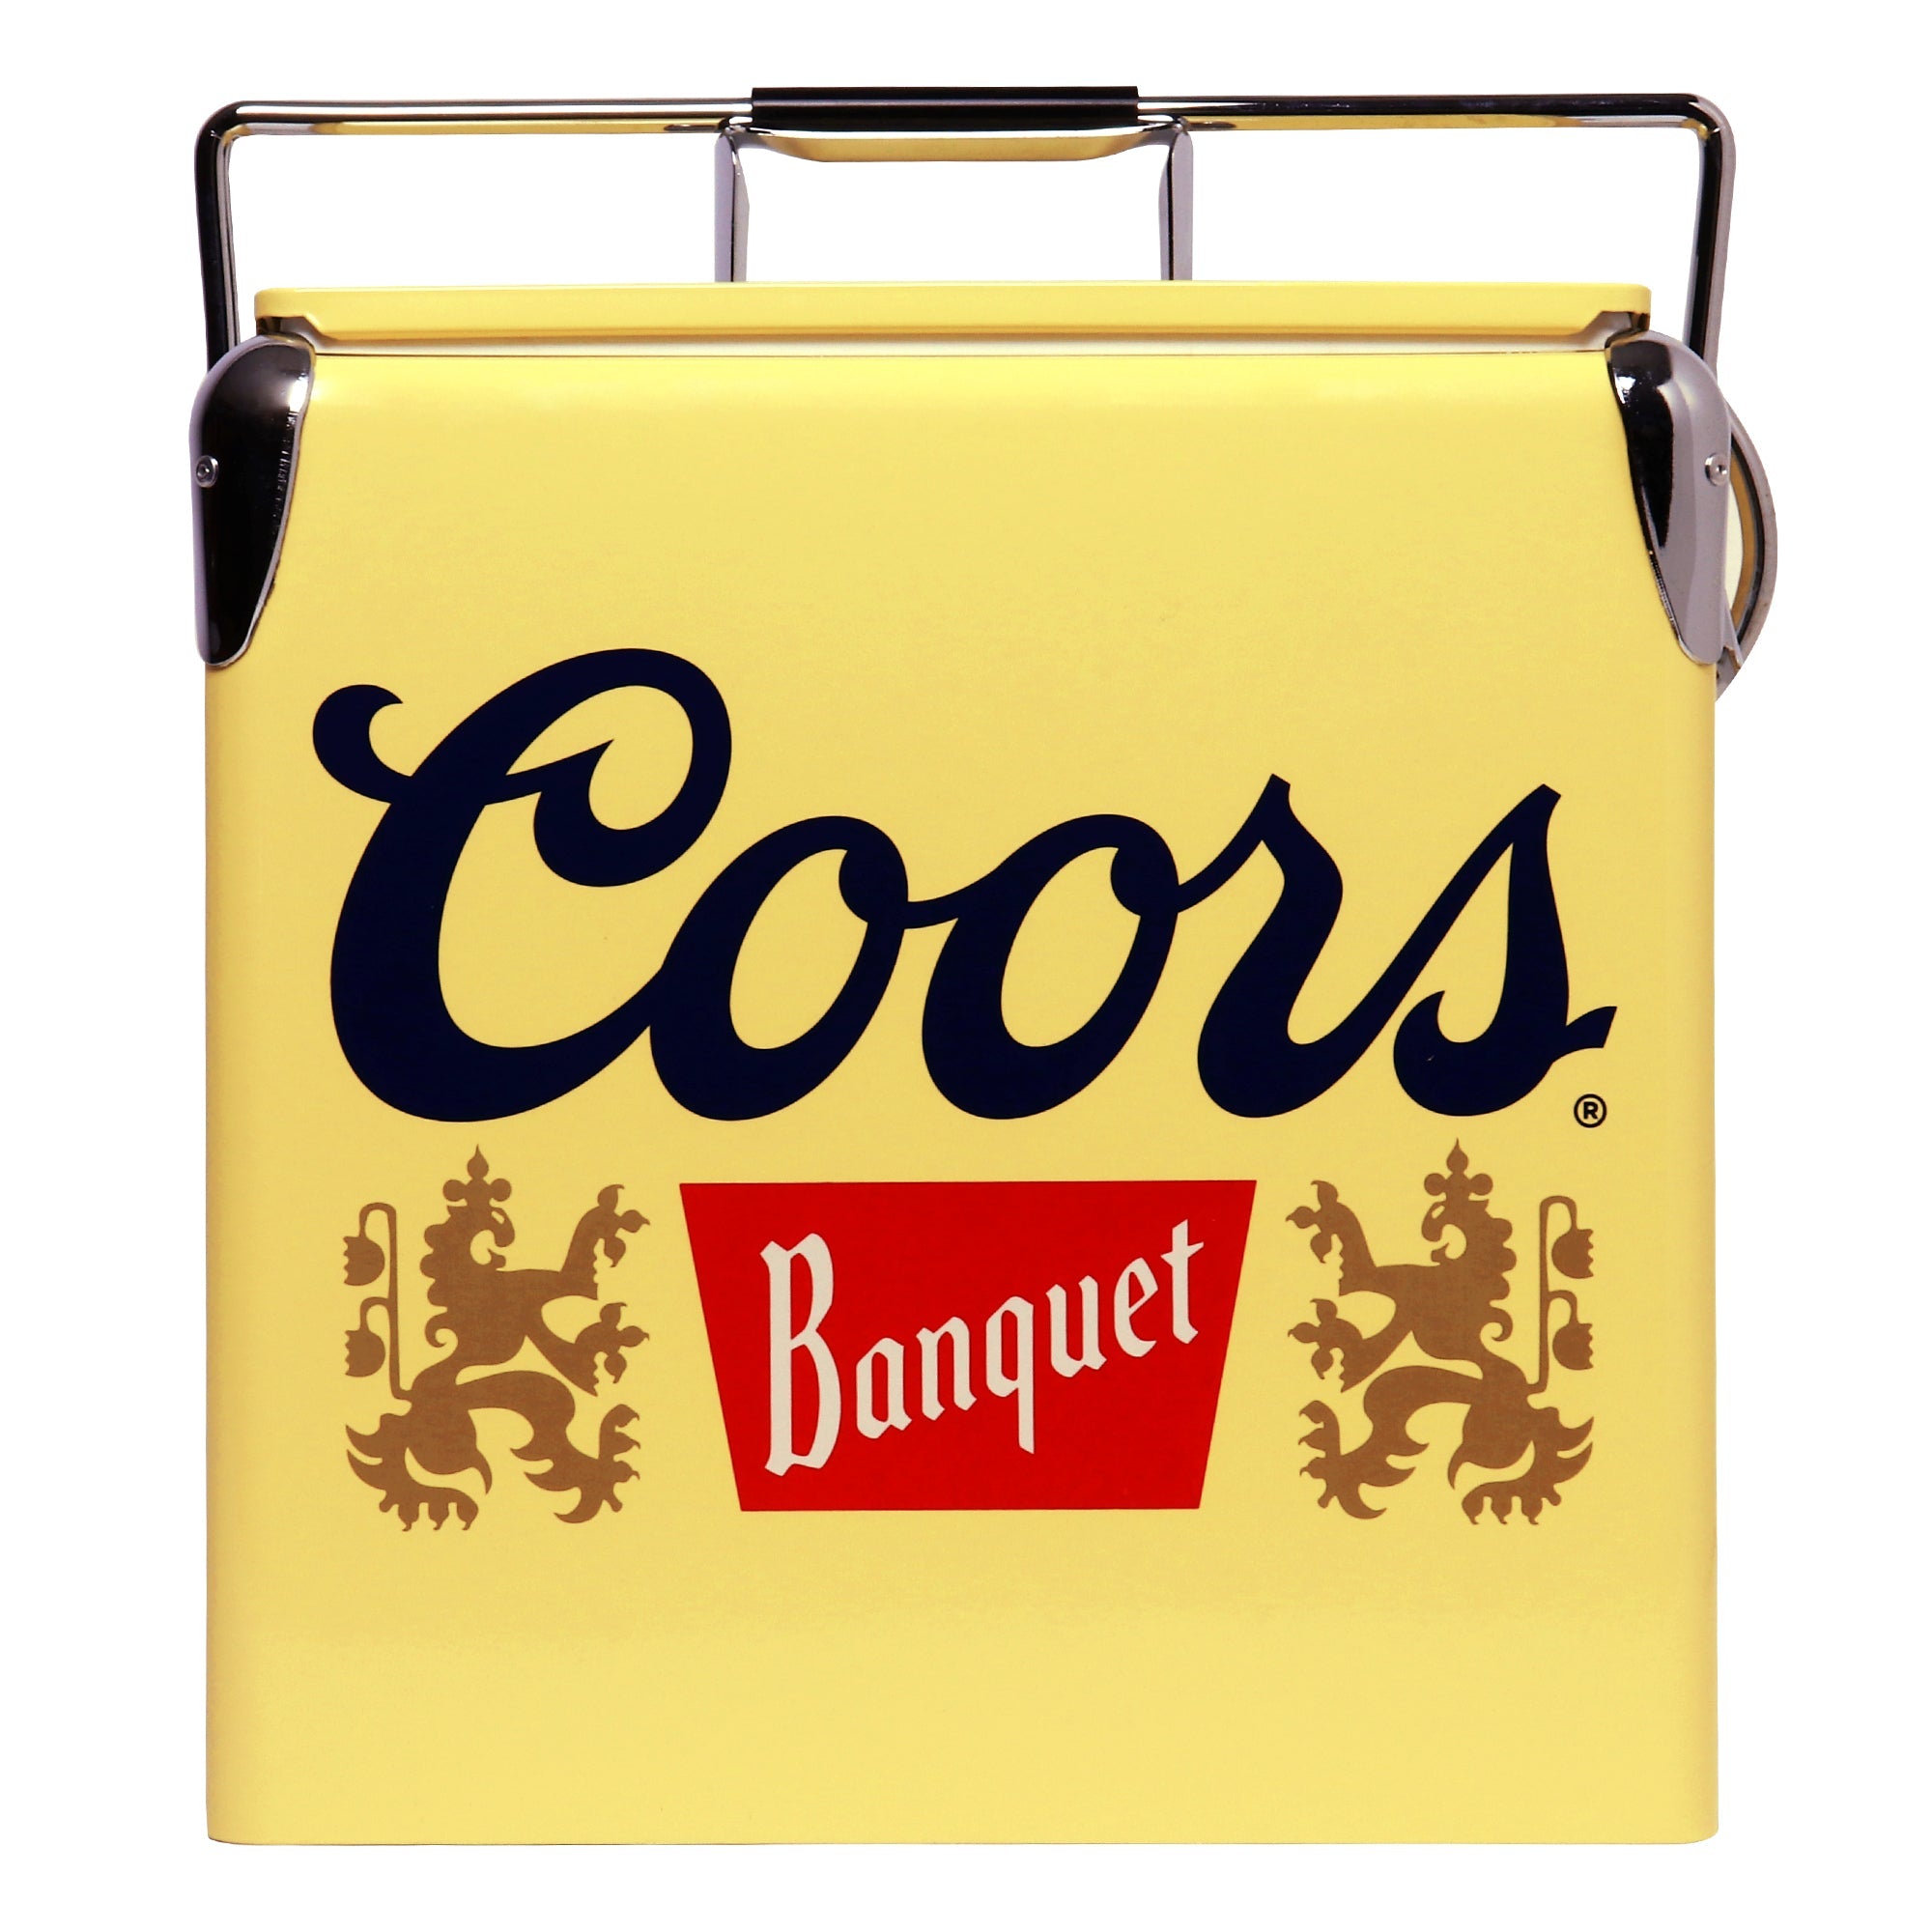 Product shot of front view of Coors Banquet retro ice chest cooler, closed, on a white background